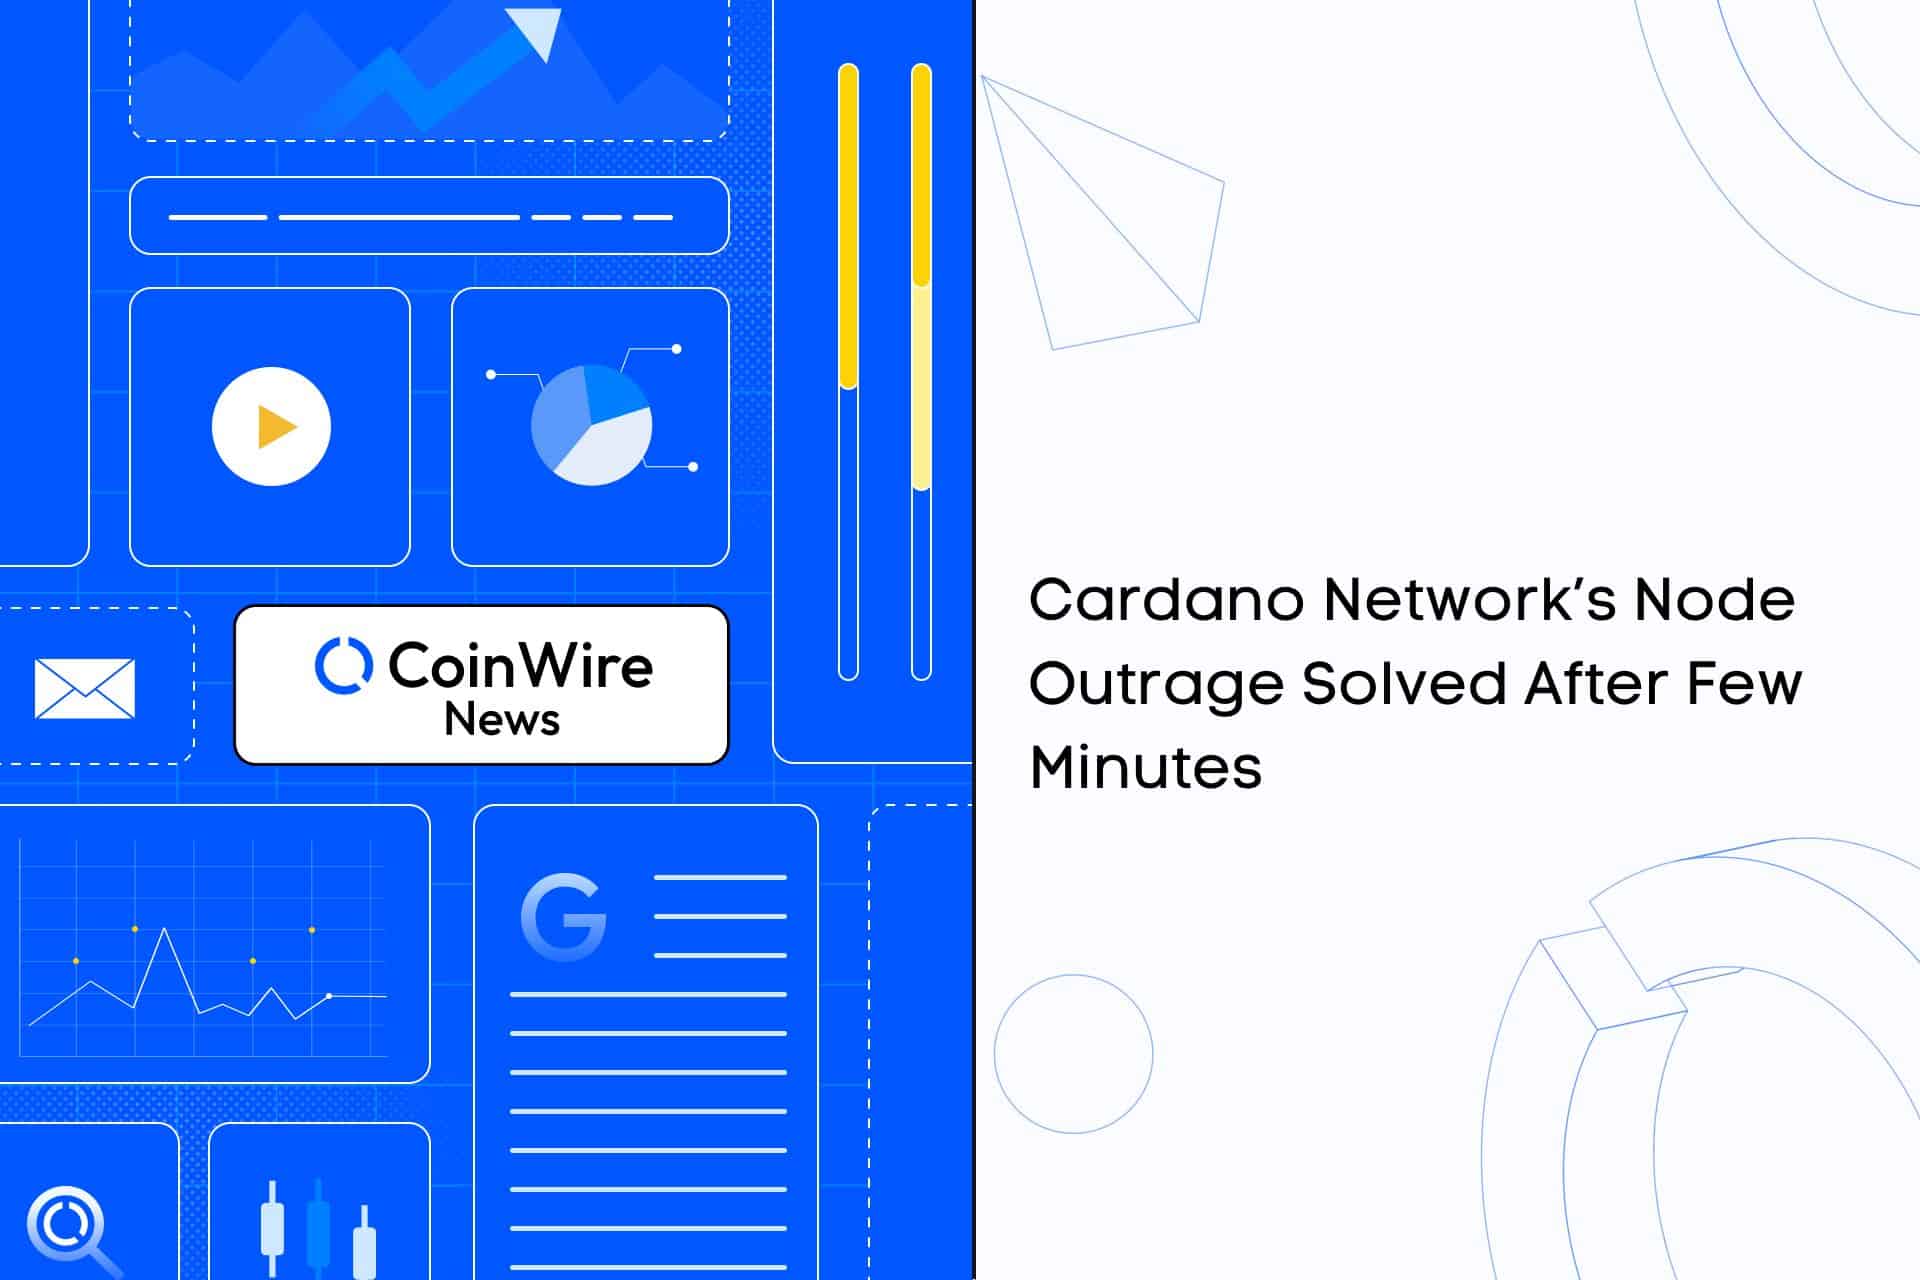 Cardano Network’s Node Outrage Solved After Few Minutes